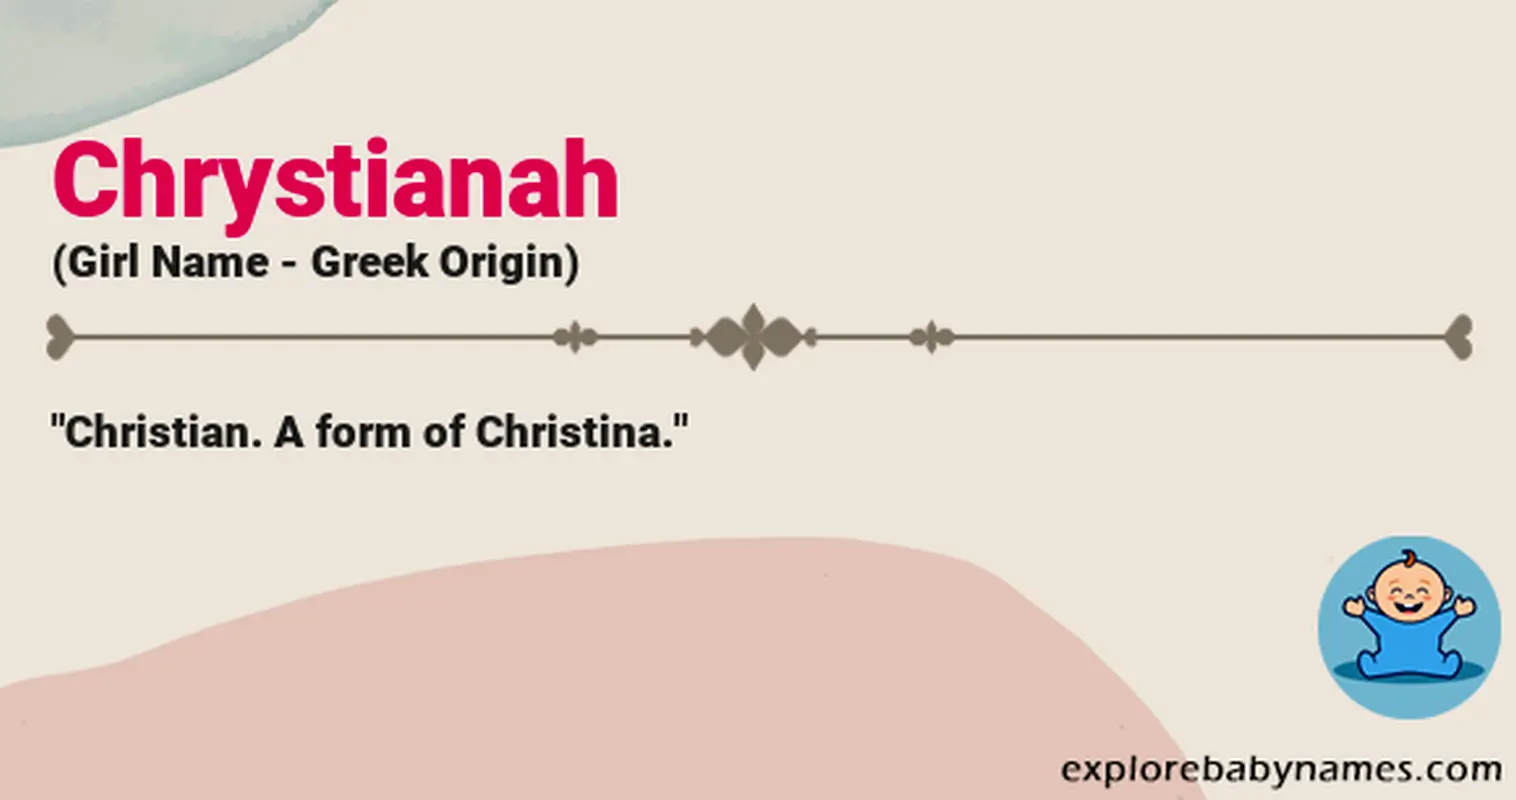 Meaning of Chrystianah